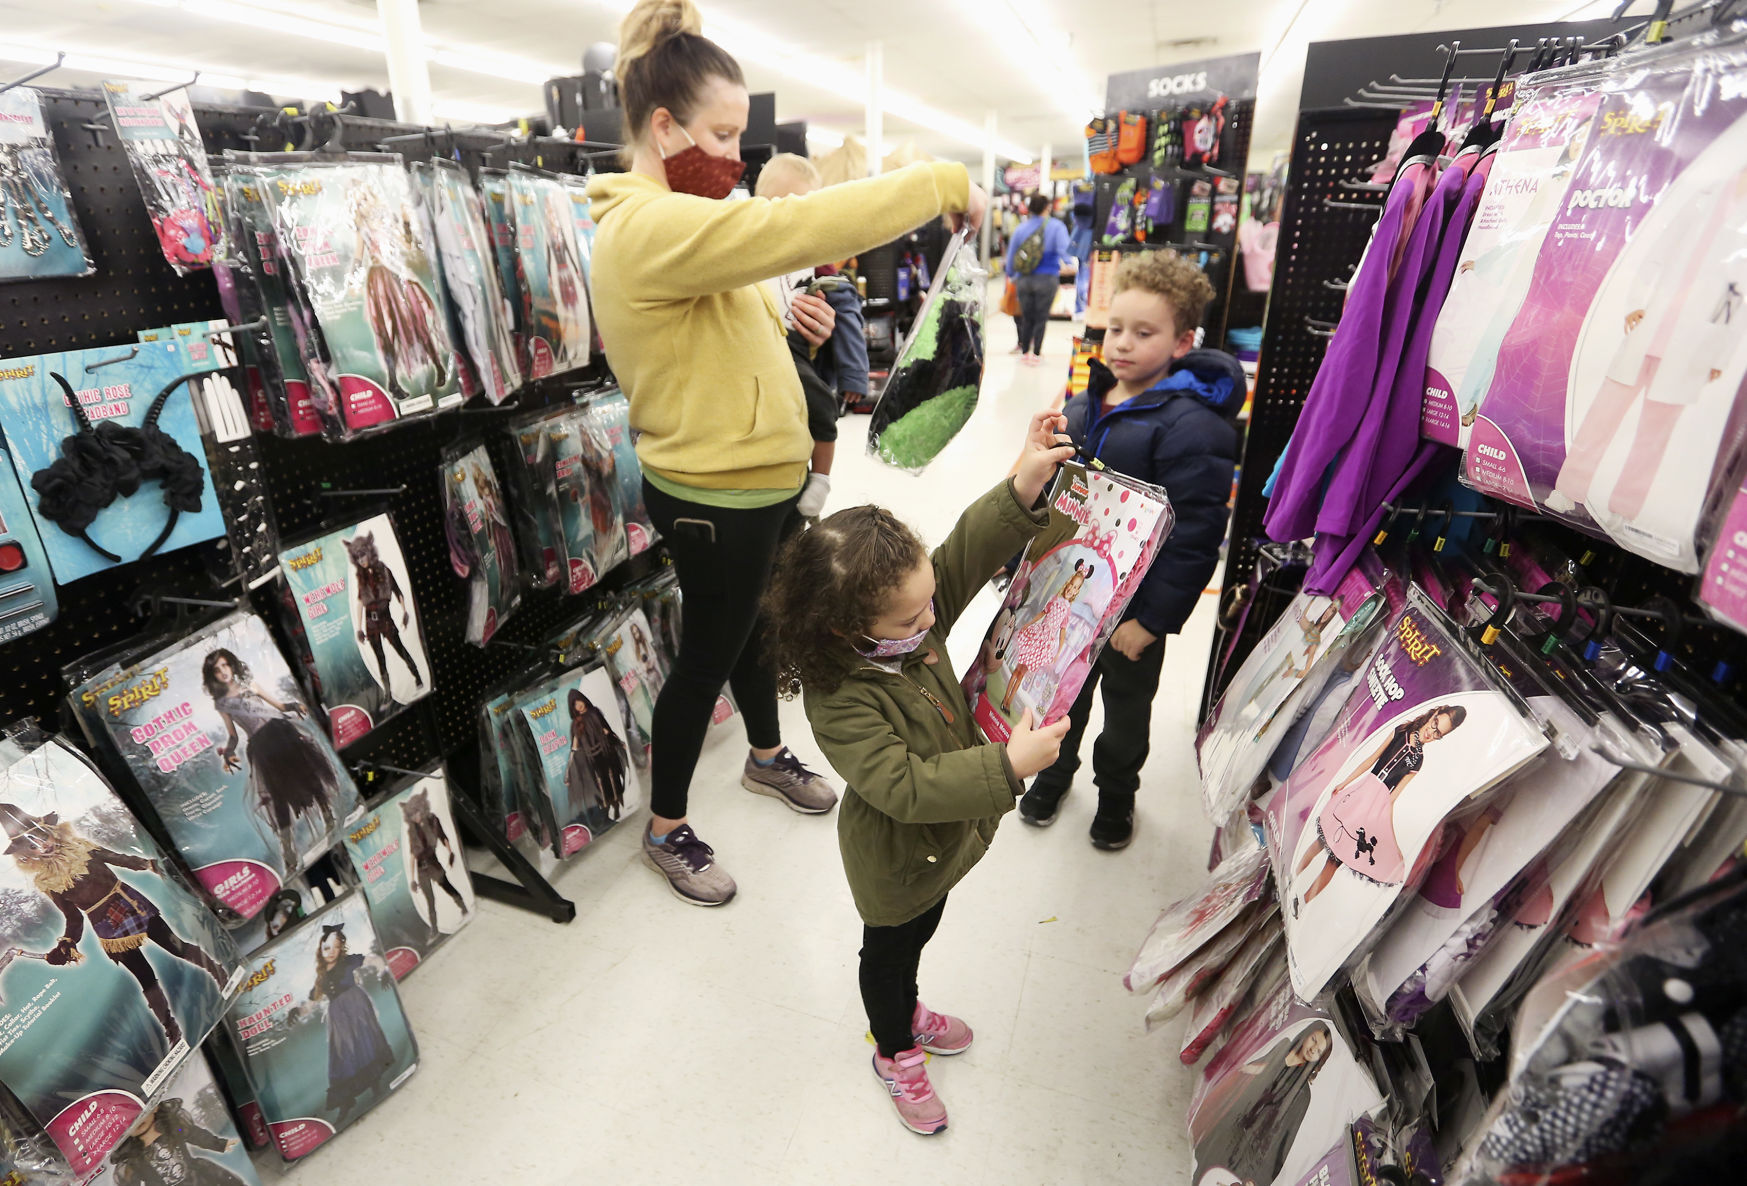 Carrie Johnson (from left), Evelyn Johnson, 3, and Braxton Johnson, 4, all of Dyersville, Iowa, browse costumes at Spirit Halloween in Dubuque on Tuesday, Oct. 20, 2020. PHOTO CREDIT: NICKI KOHL